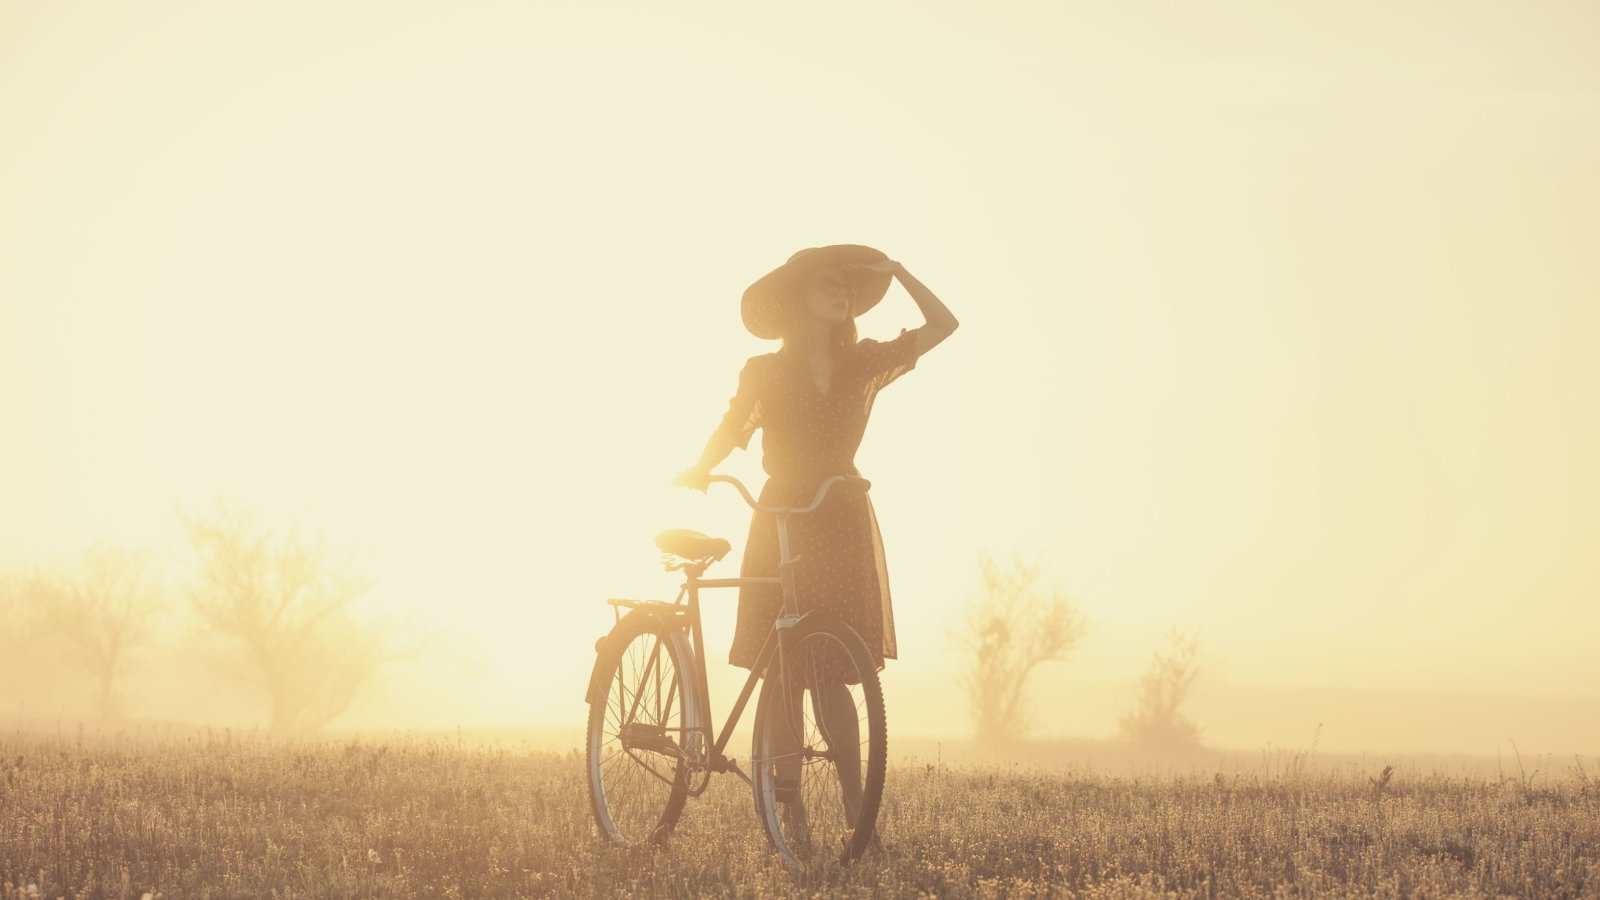 Girl And Bicycle On Misty Day screenshot #1 1600x900